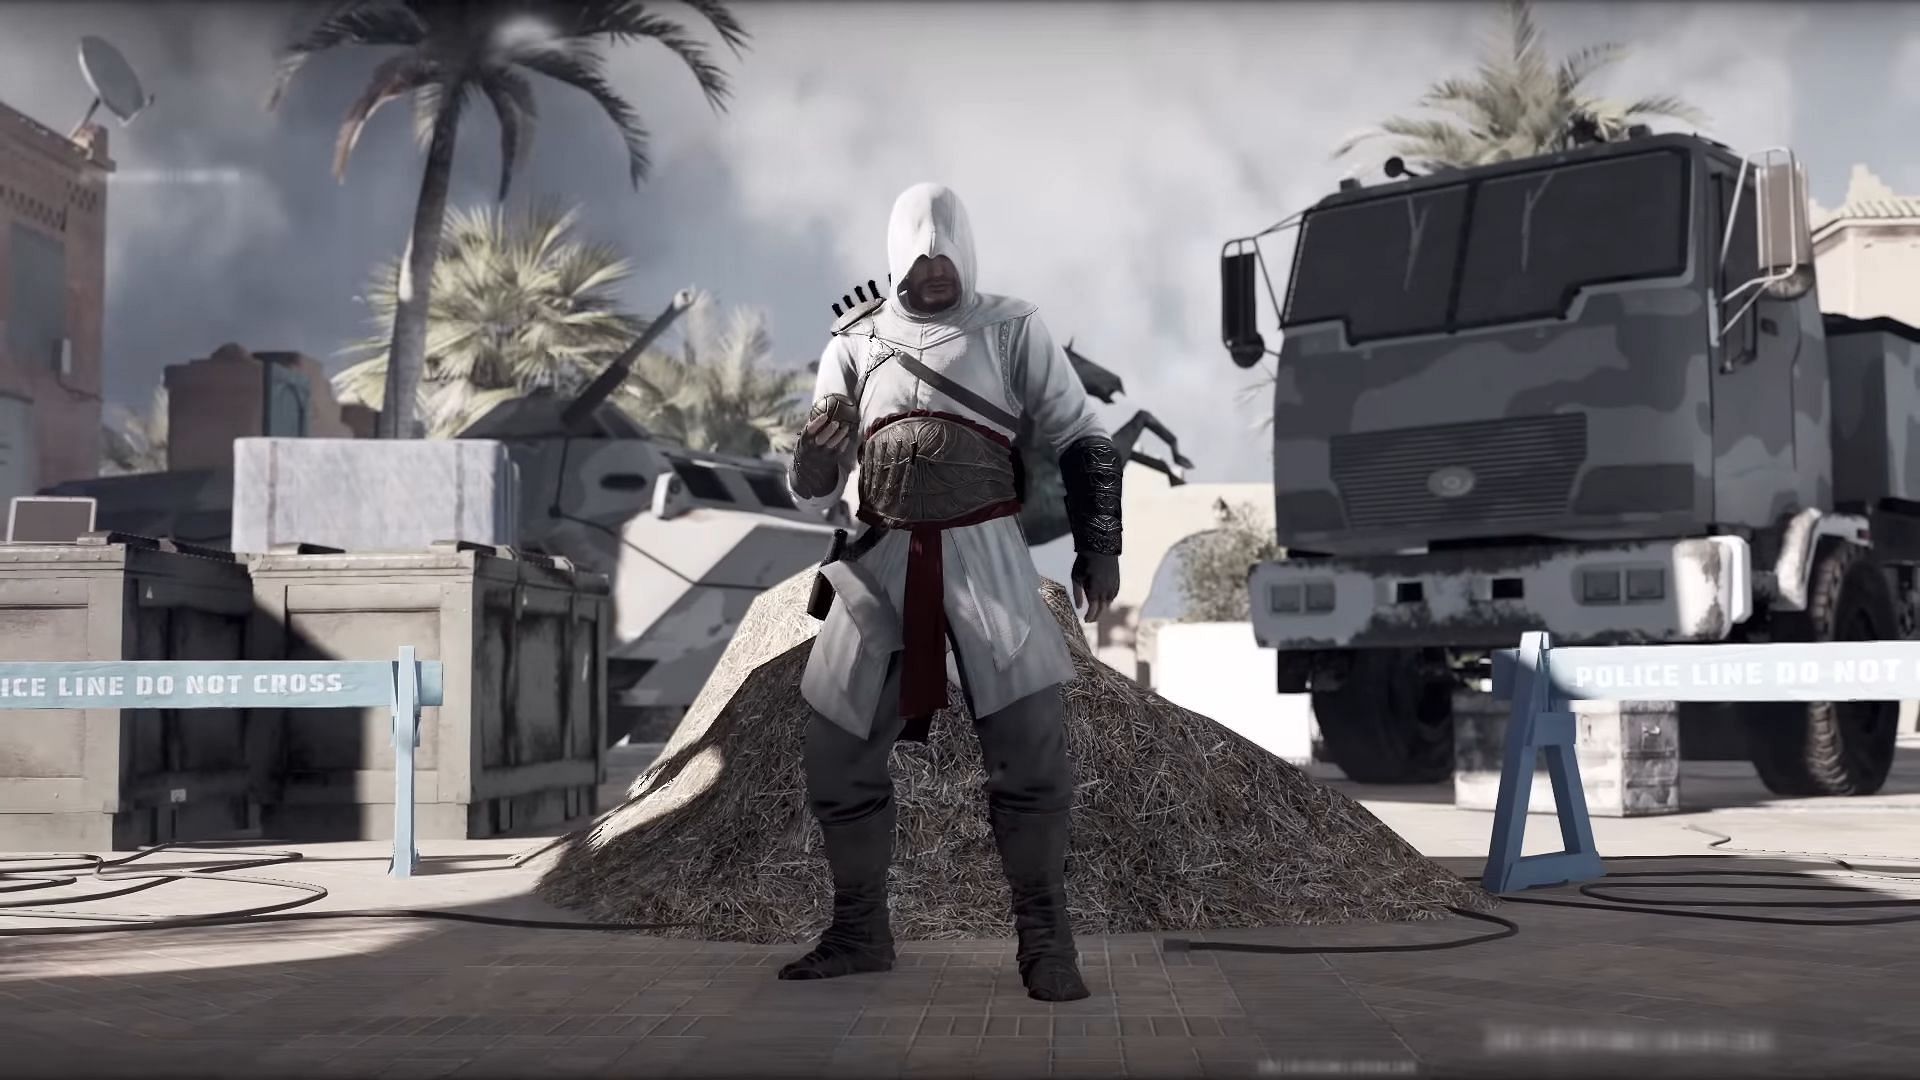 Flores&#039; Elite skin is based on Altair from Assassin&#039;s Creed (Image via Ubisoft)